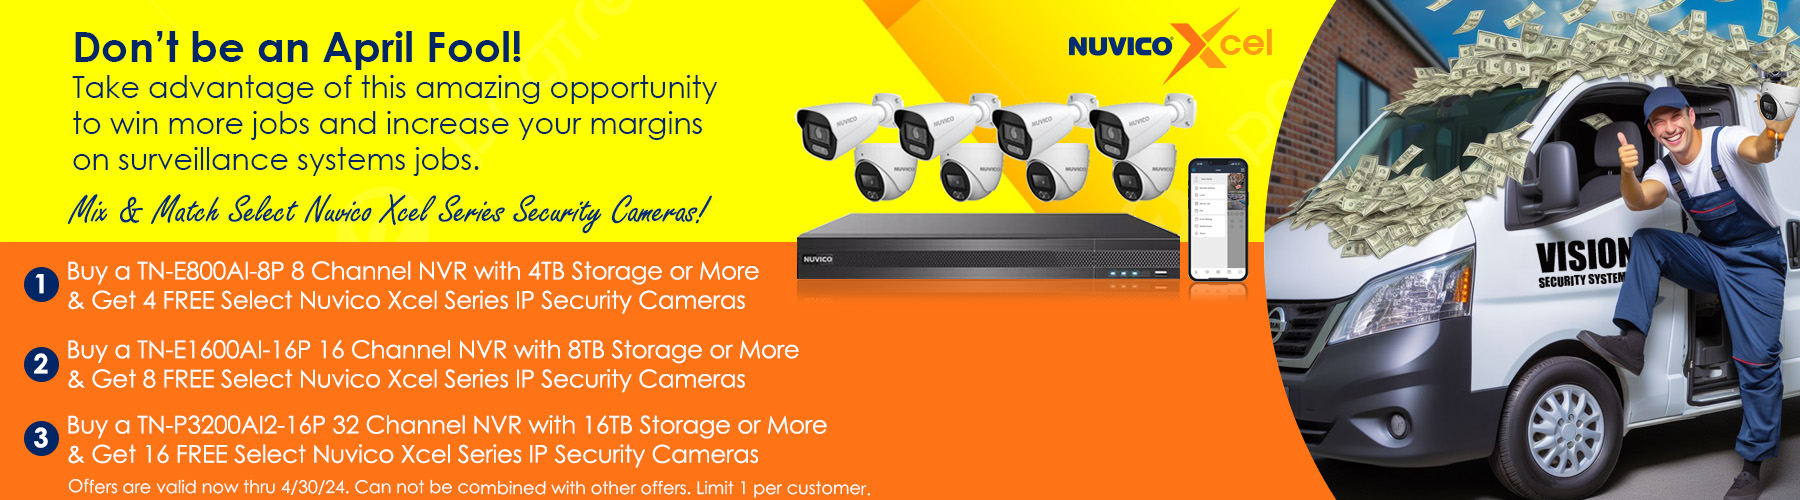 Nuvico Xcel Series Free Security Cameras Offer